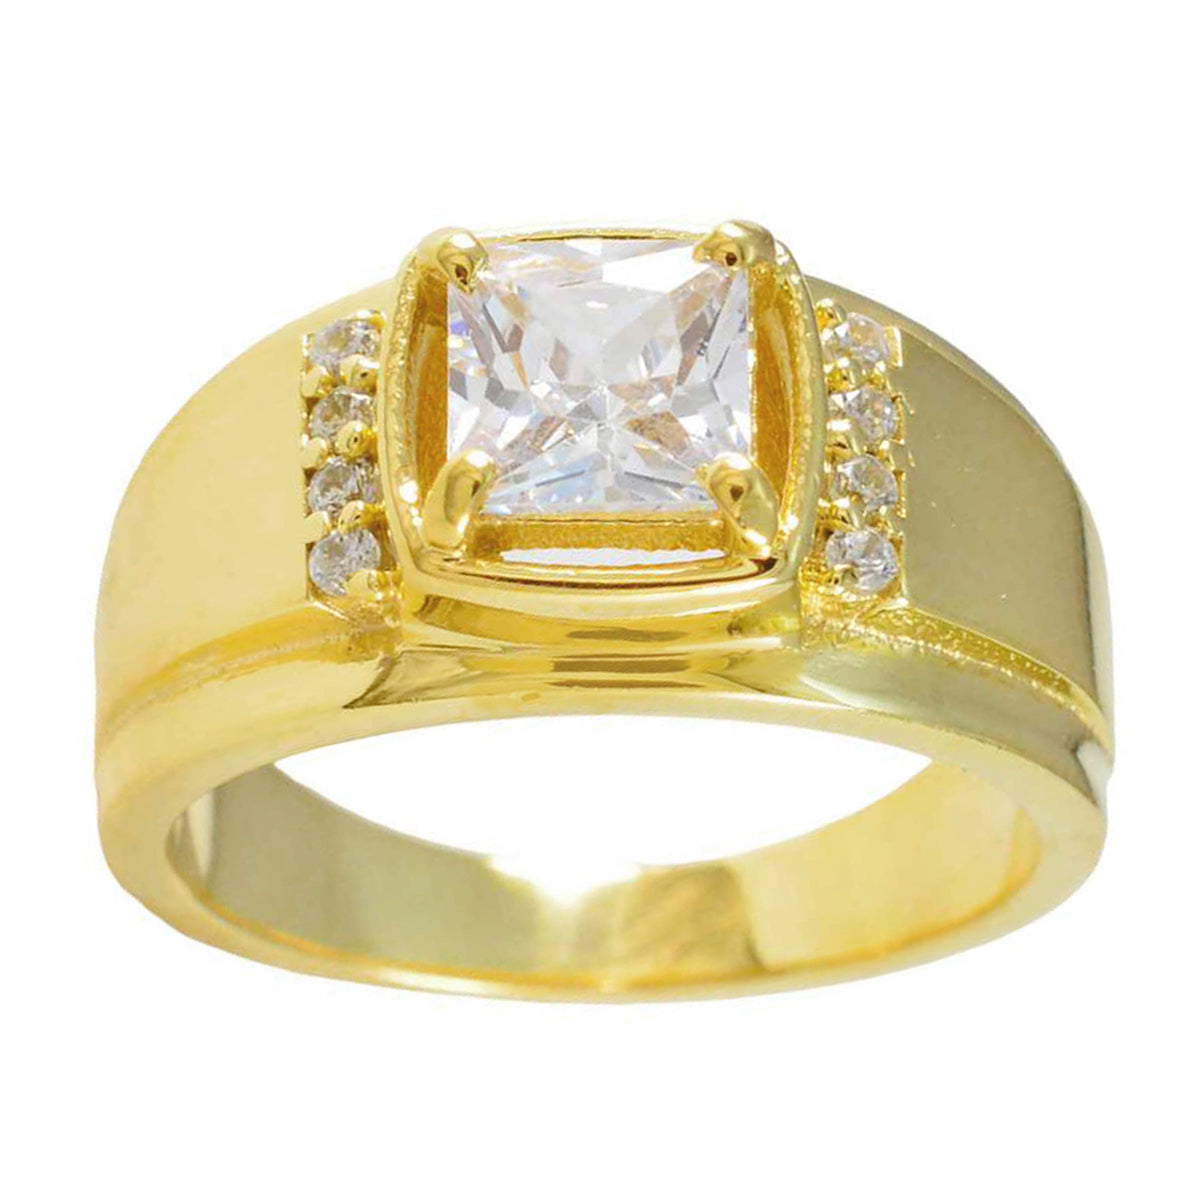 Riyo Excellent Silver Ring With Yellow Gold Plating White CZ Stone square Shape Prong Setting  Jewelry Wedding Ring